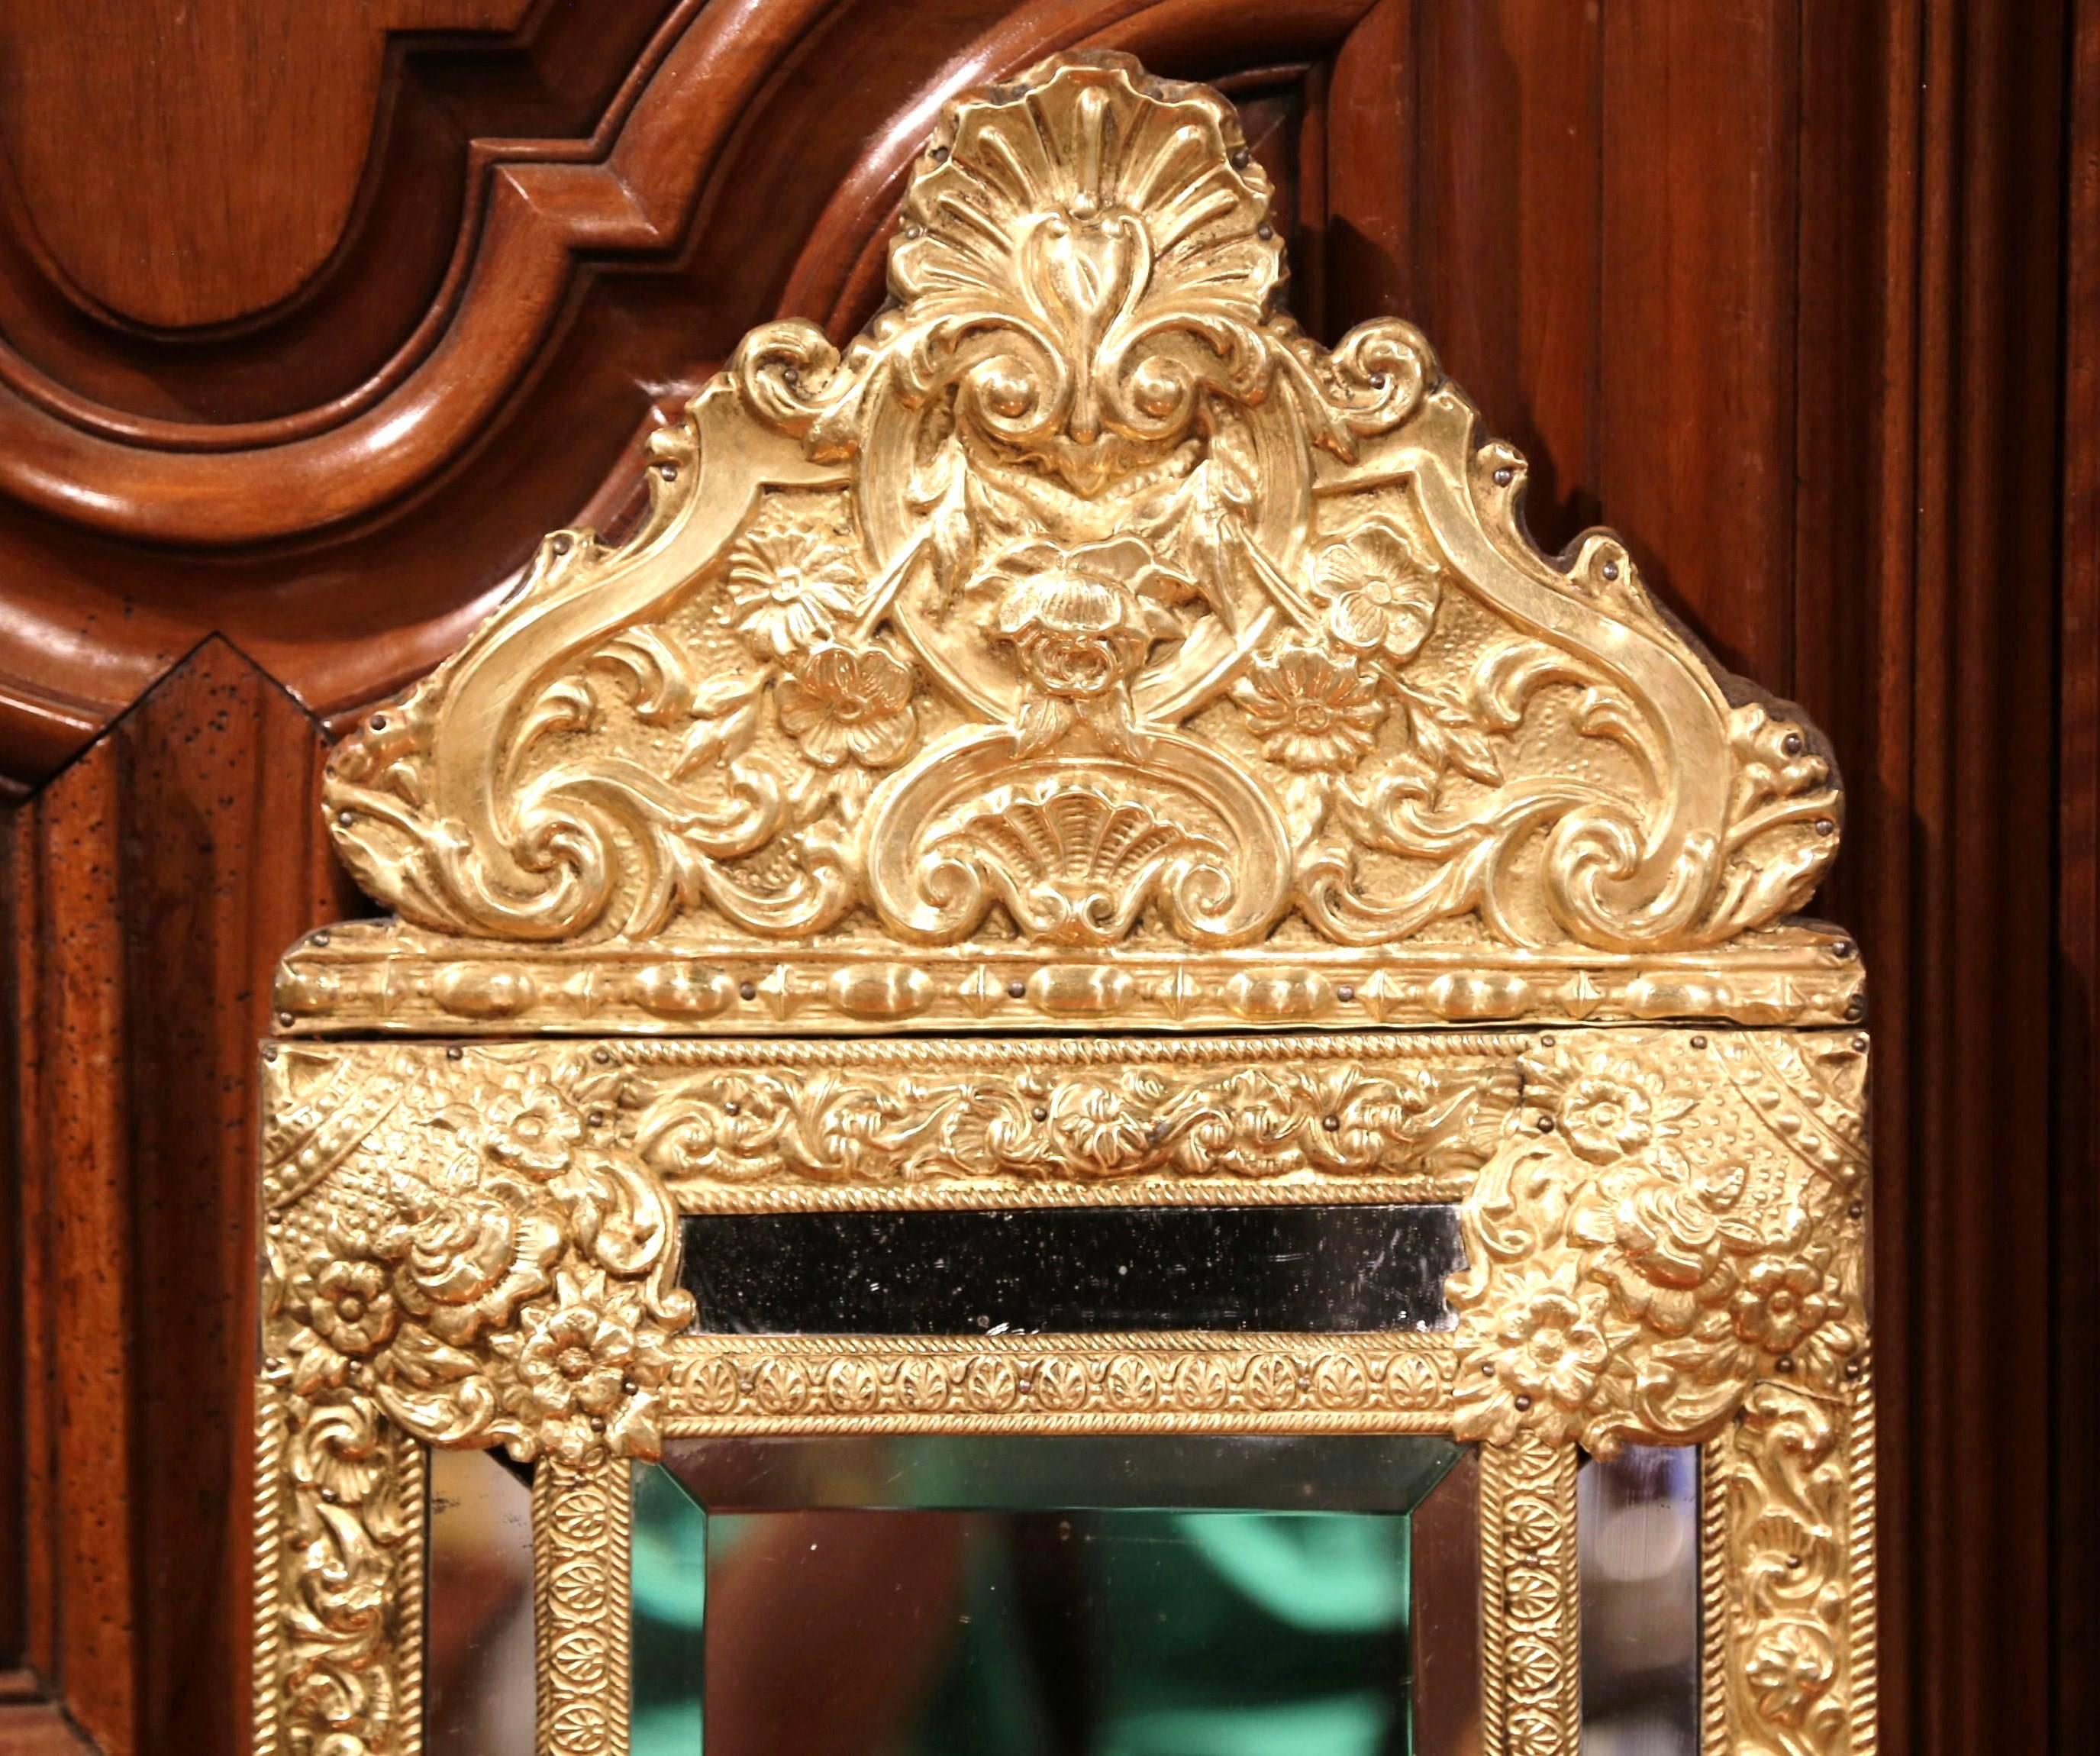 This small, elegant Napoleon III copper mirror was crafted in France, circa 1860. The antique wall hanging repousse piece features an ornate, heavily embellished pediment with a large carved shell and other decorative motifs. The central rectangular